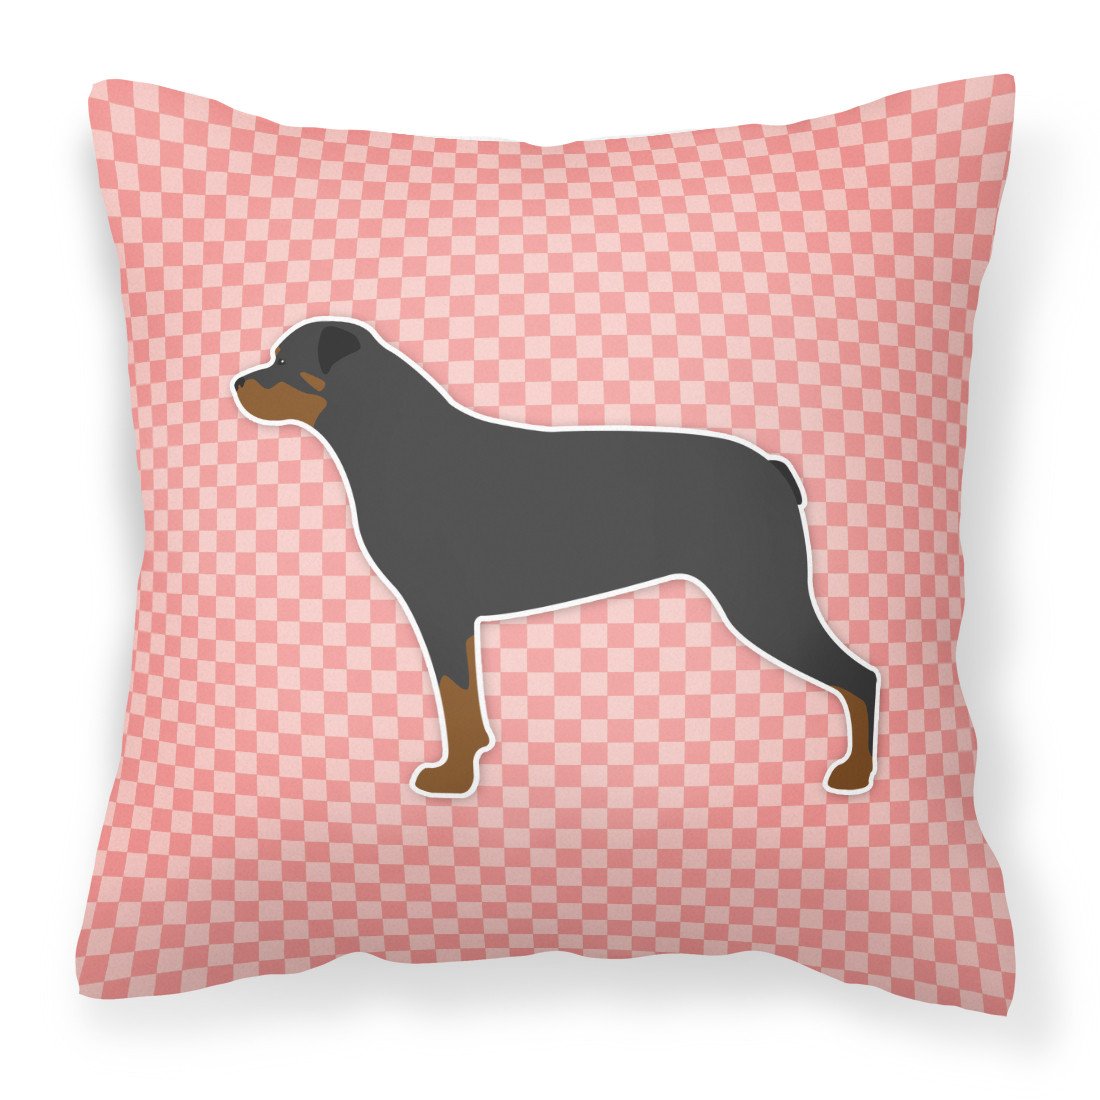 Rottweiler Checkerboard Pink Fabric Decorative Pillow BB3666PW1818 by Caroline's Treasures